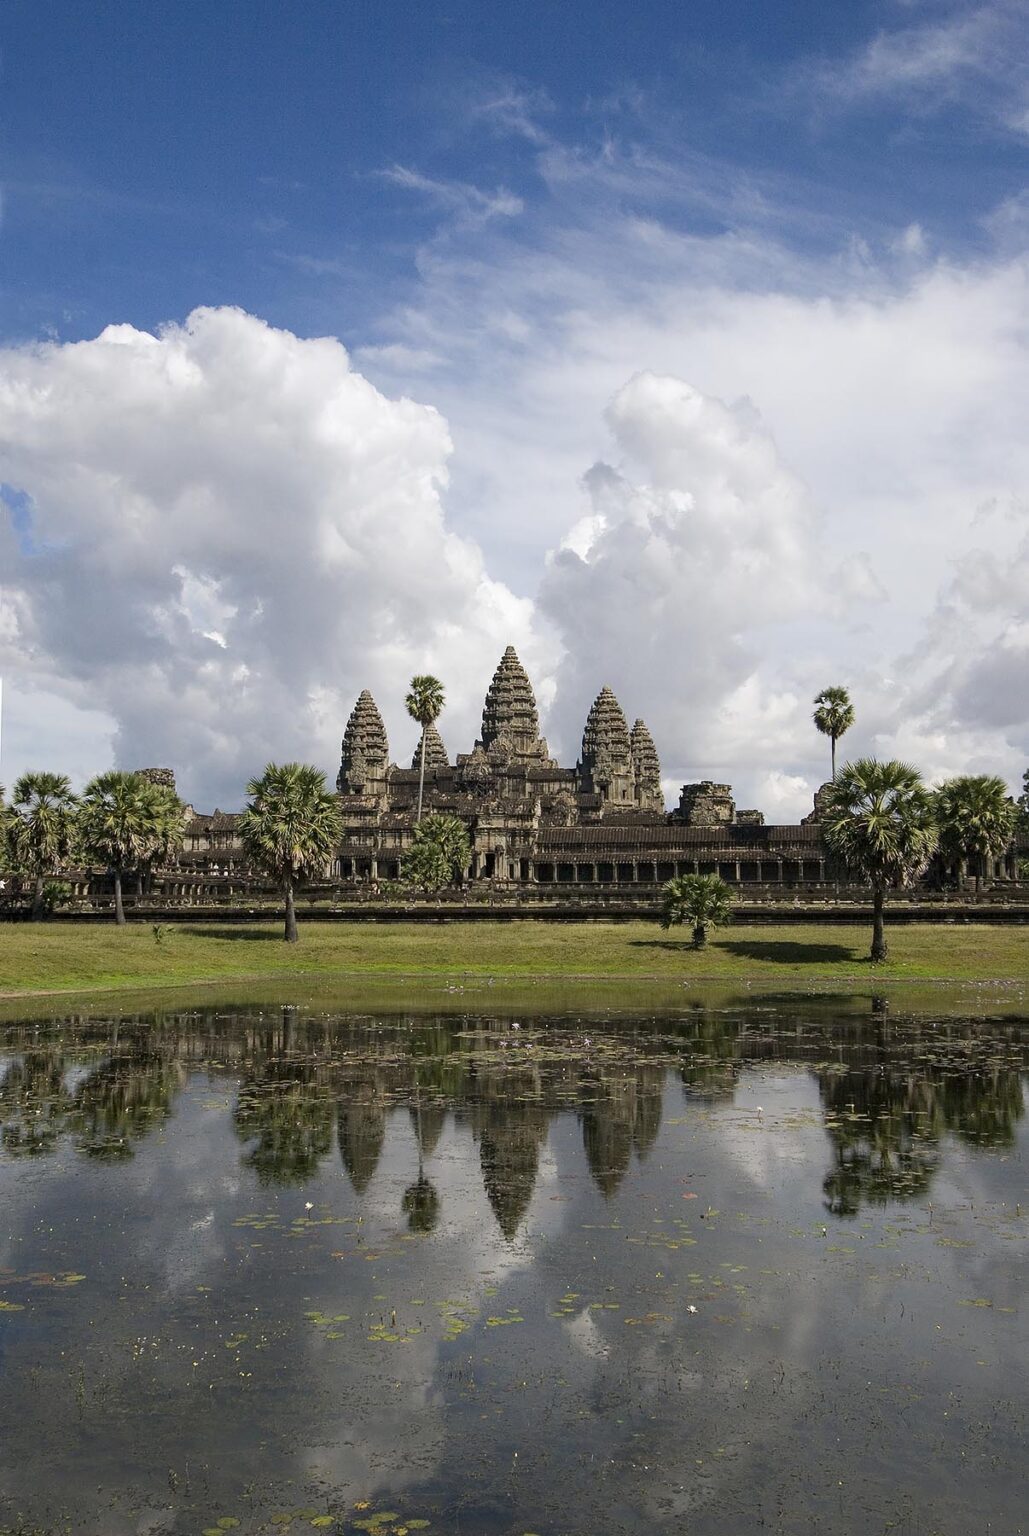 Stone temples representing the five peaks of Mount Meru at Angkor Wat and reflection pond, built in the 11th century by Suryavarman the 2nd,  - Cambodia